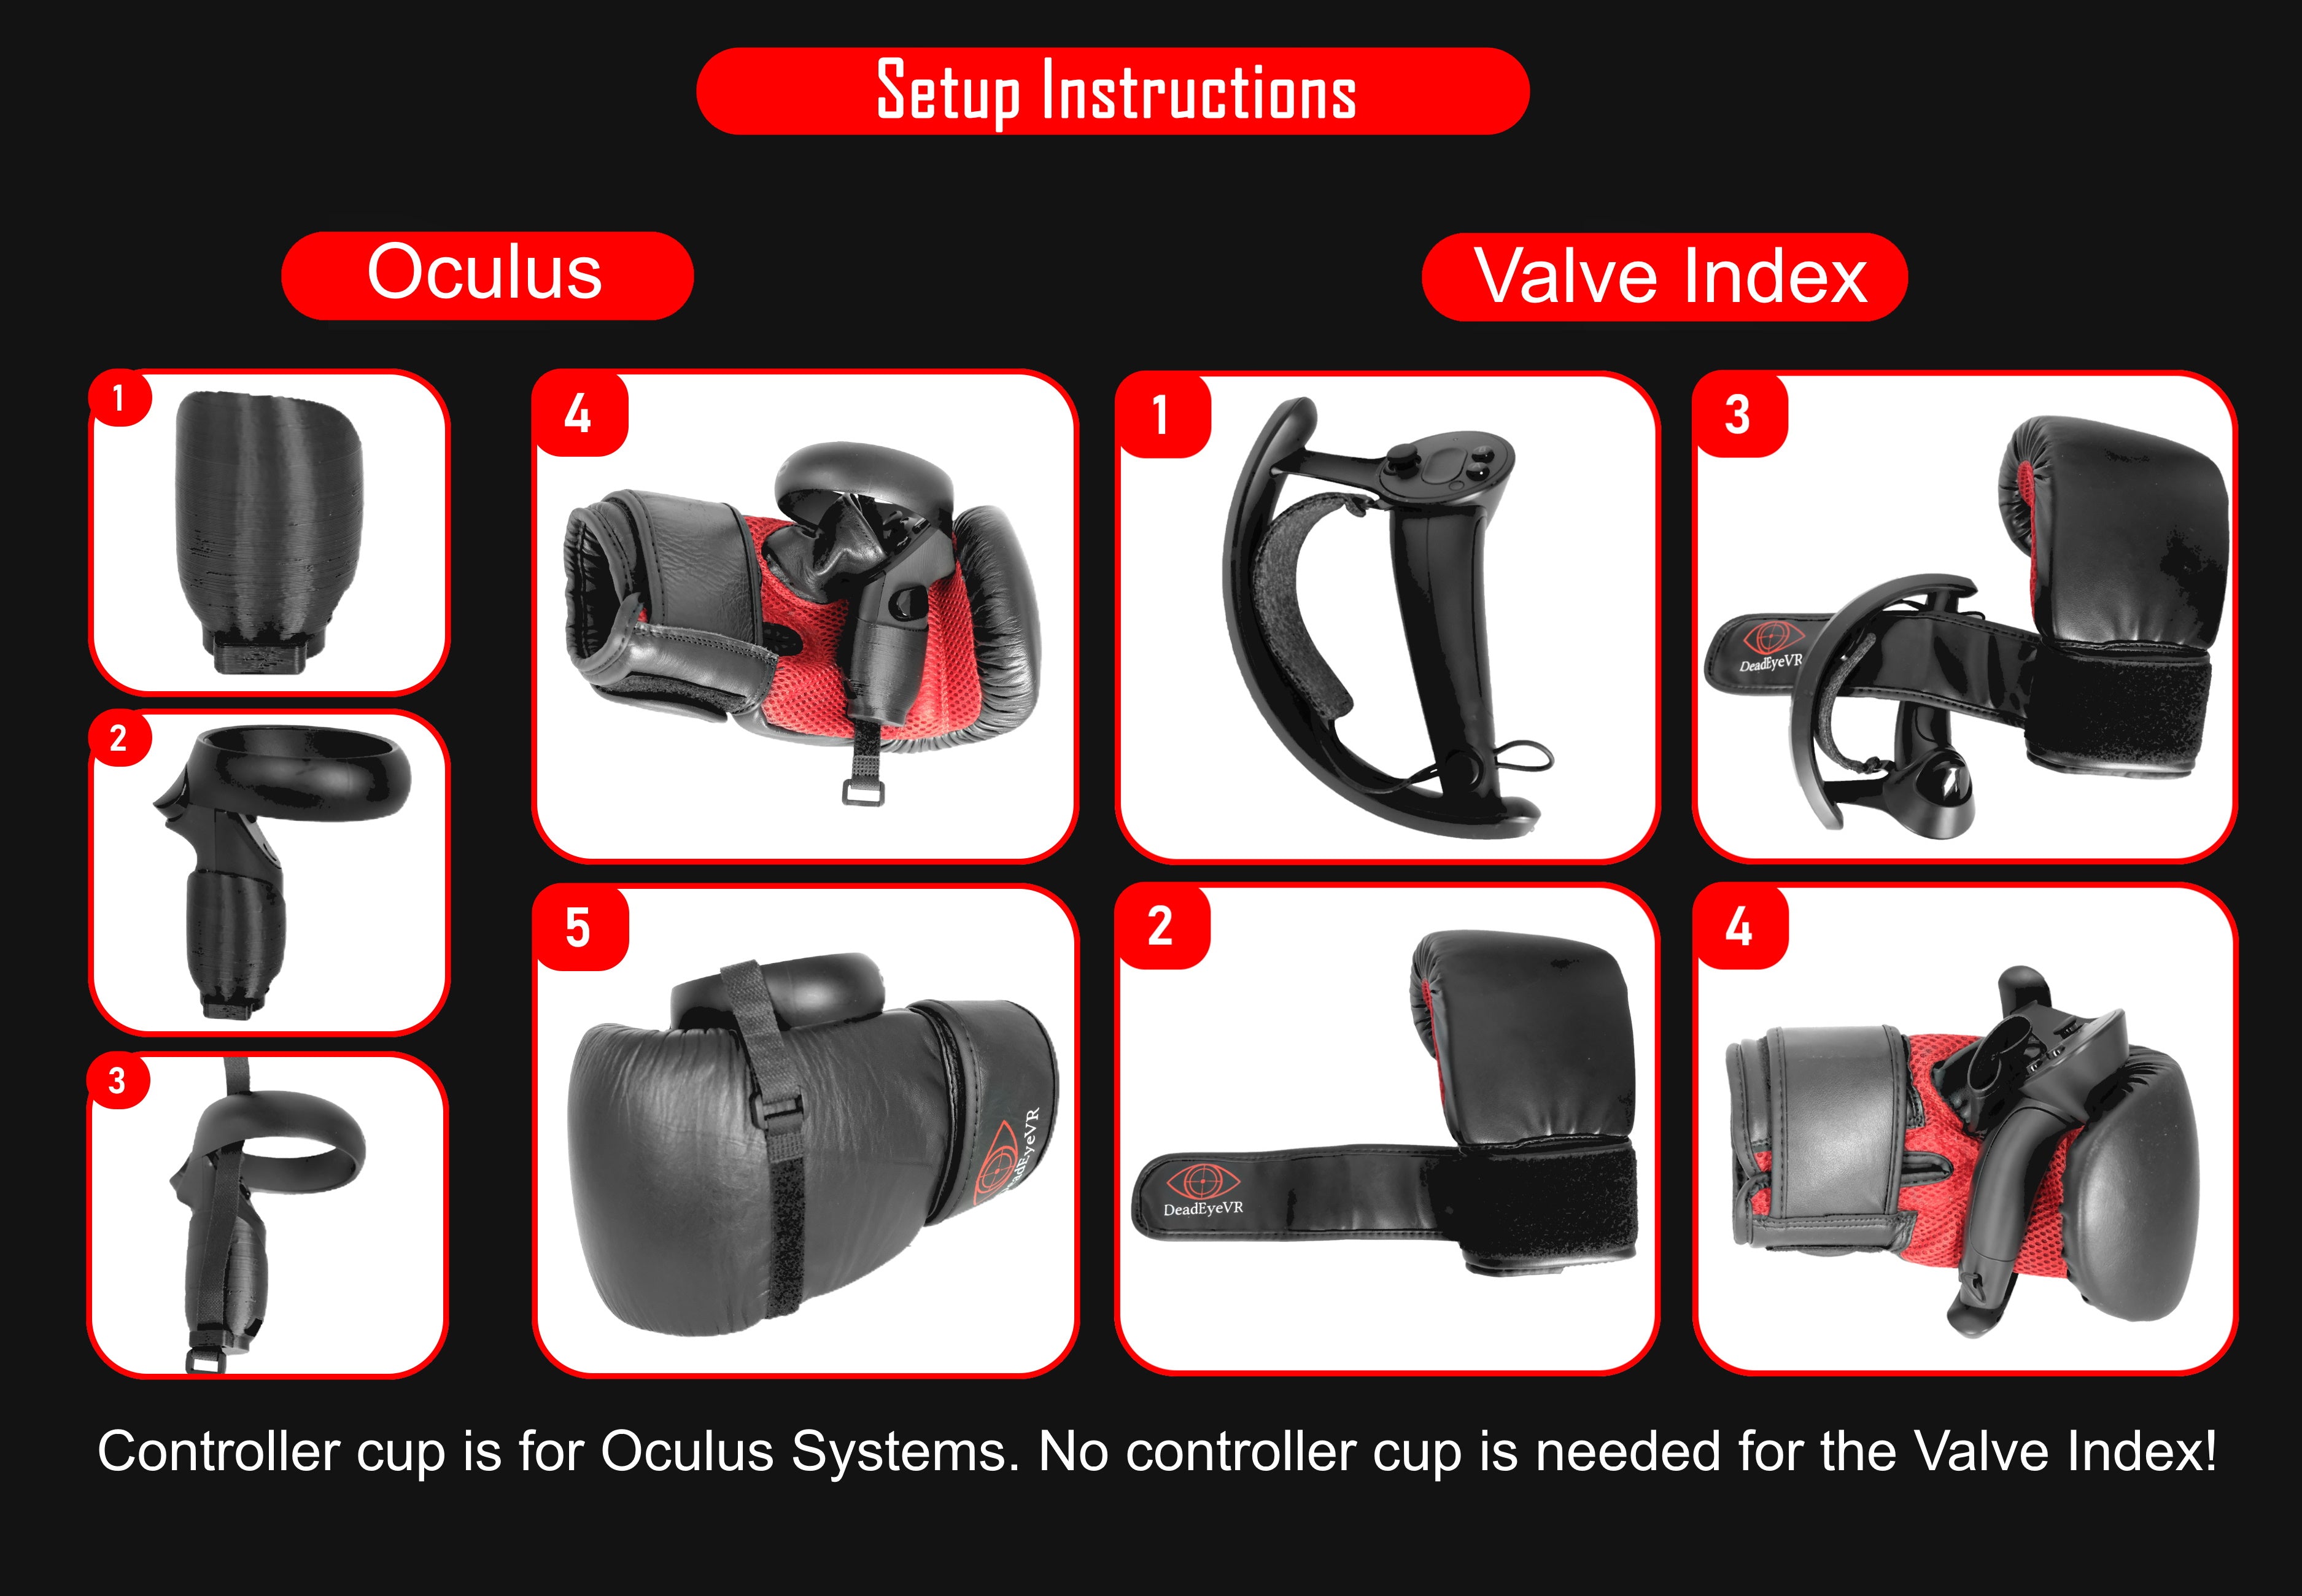 Setup Instructions. Oculus and Valve index. Shows how to install controllers onto boxing gloves. Controller cup is for oculus systems. No controller cup is needed for the valve index!